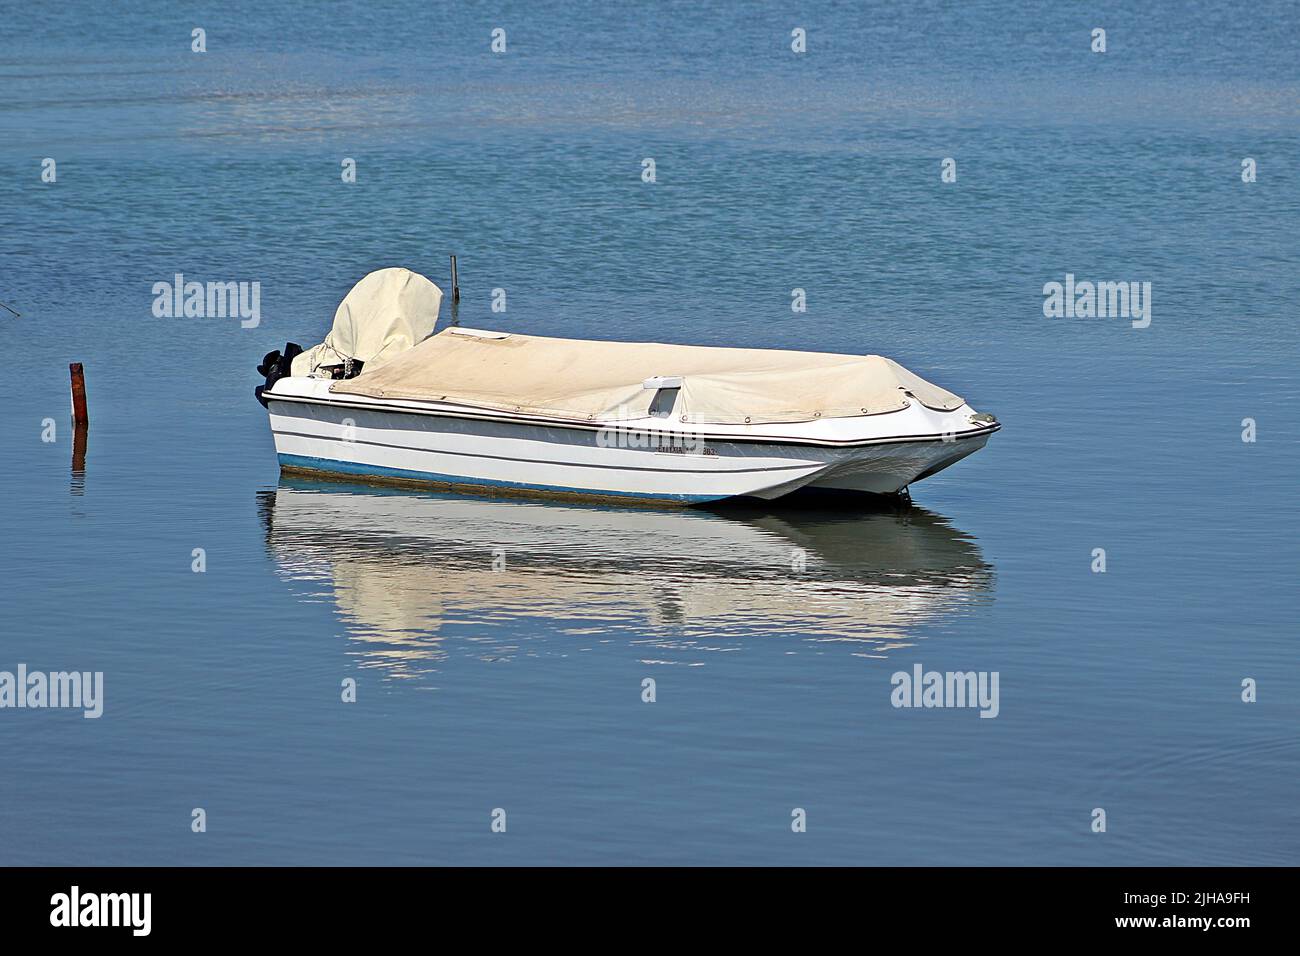 KANONI, CORFU, GREECE - SEPTEMBER 13, 2017 fishing boat moored to a stick with cover on in still clear blue water with reflections Stock Photo